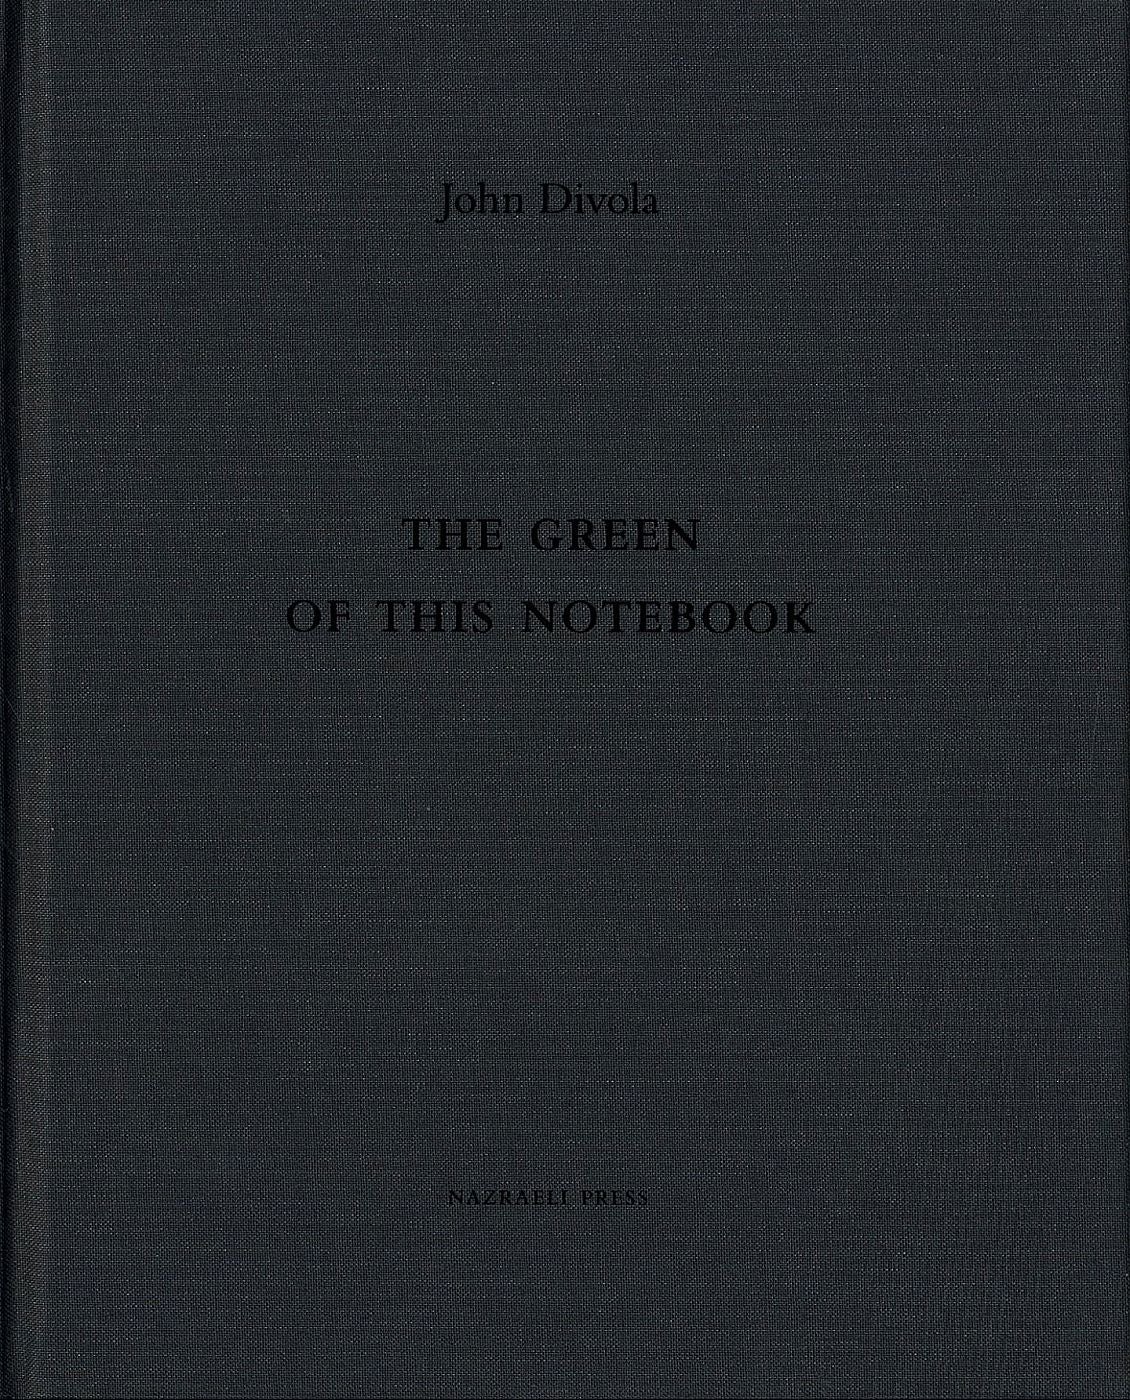 John Divola: The Green of this Notebook, Limited Edition [SIGNED]